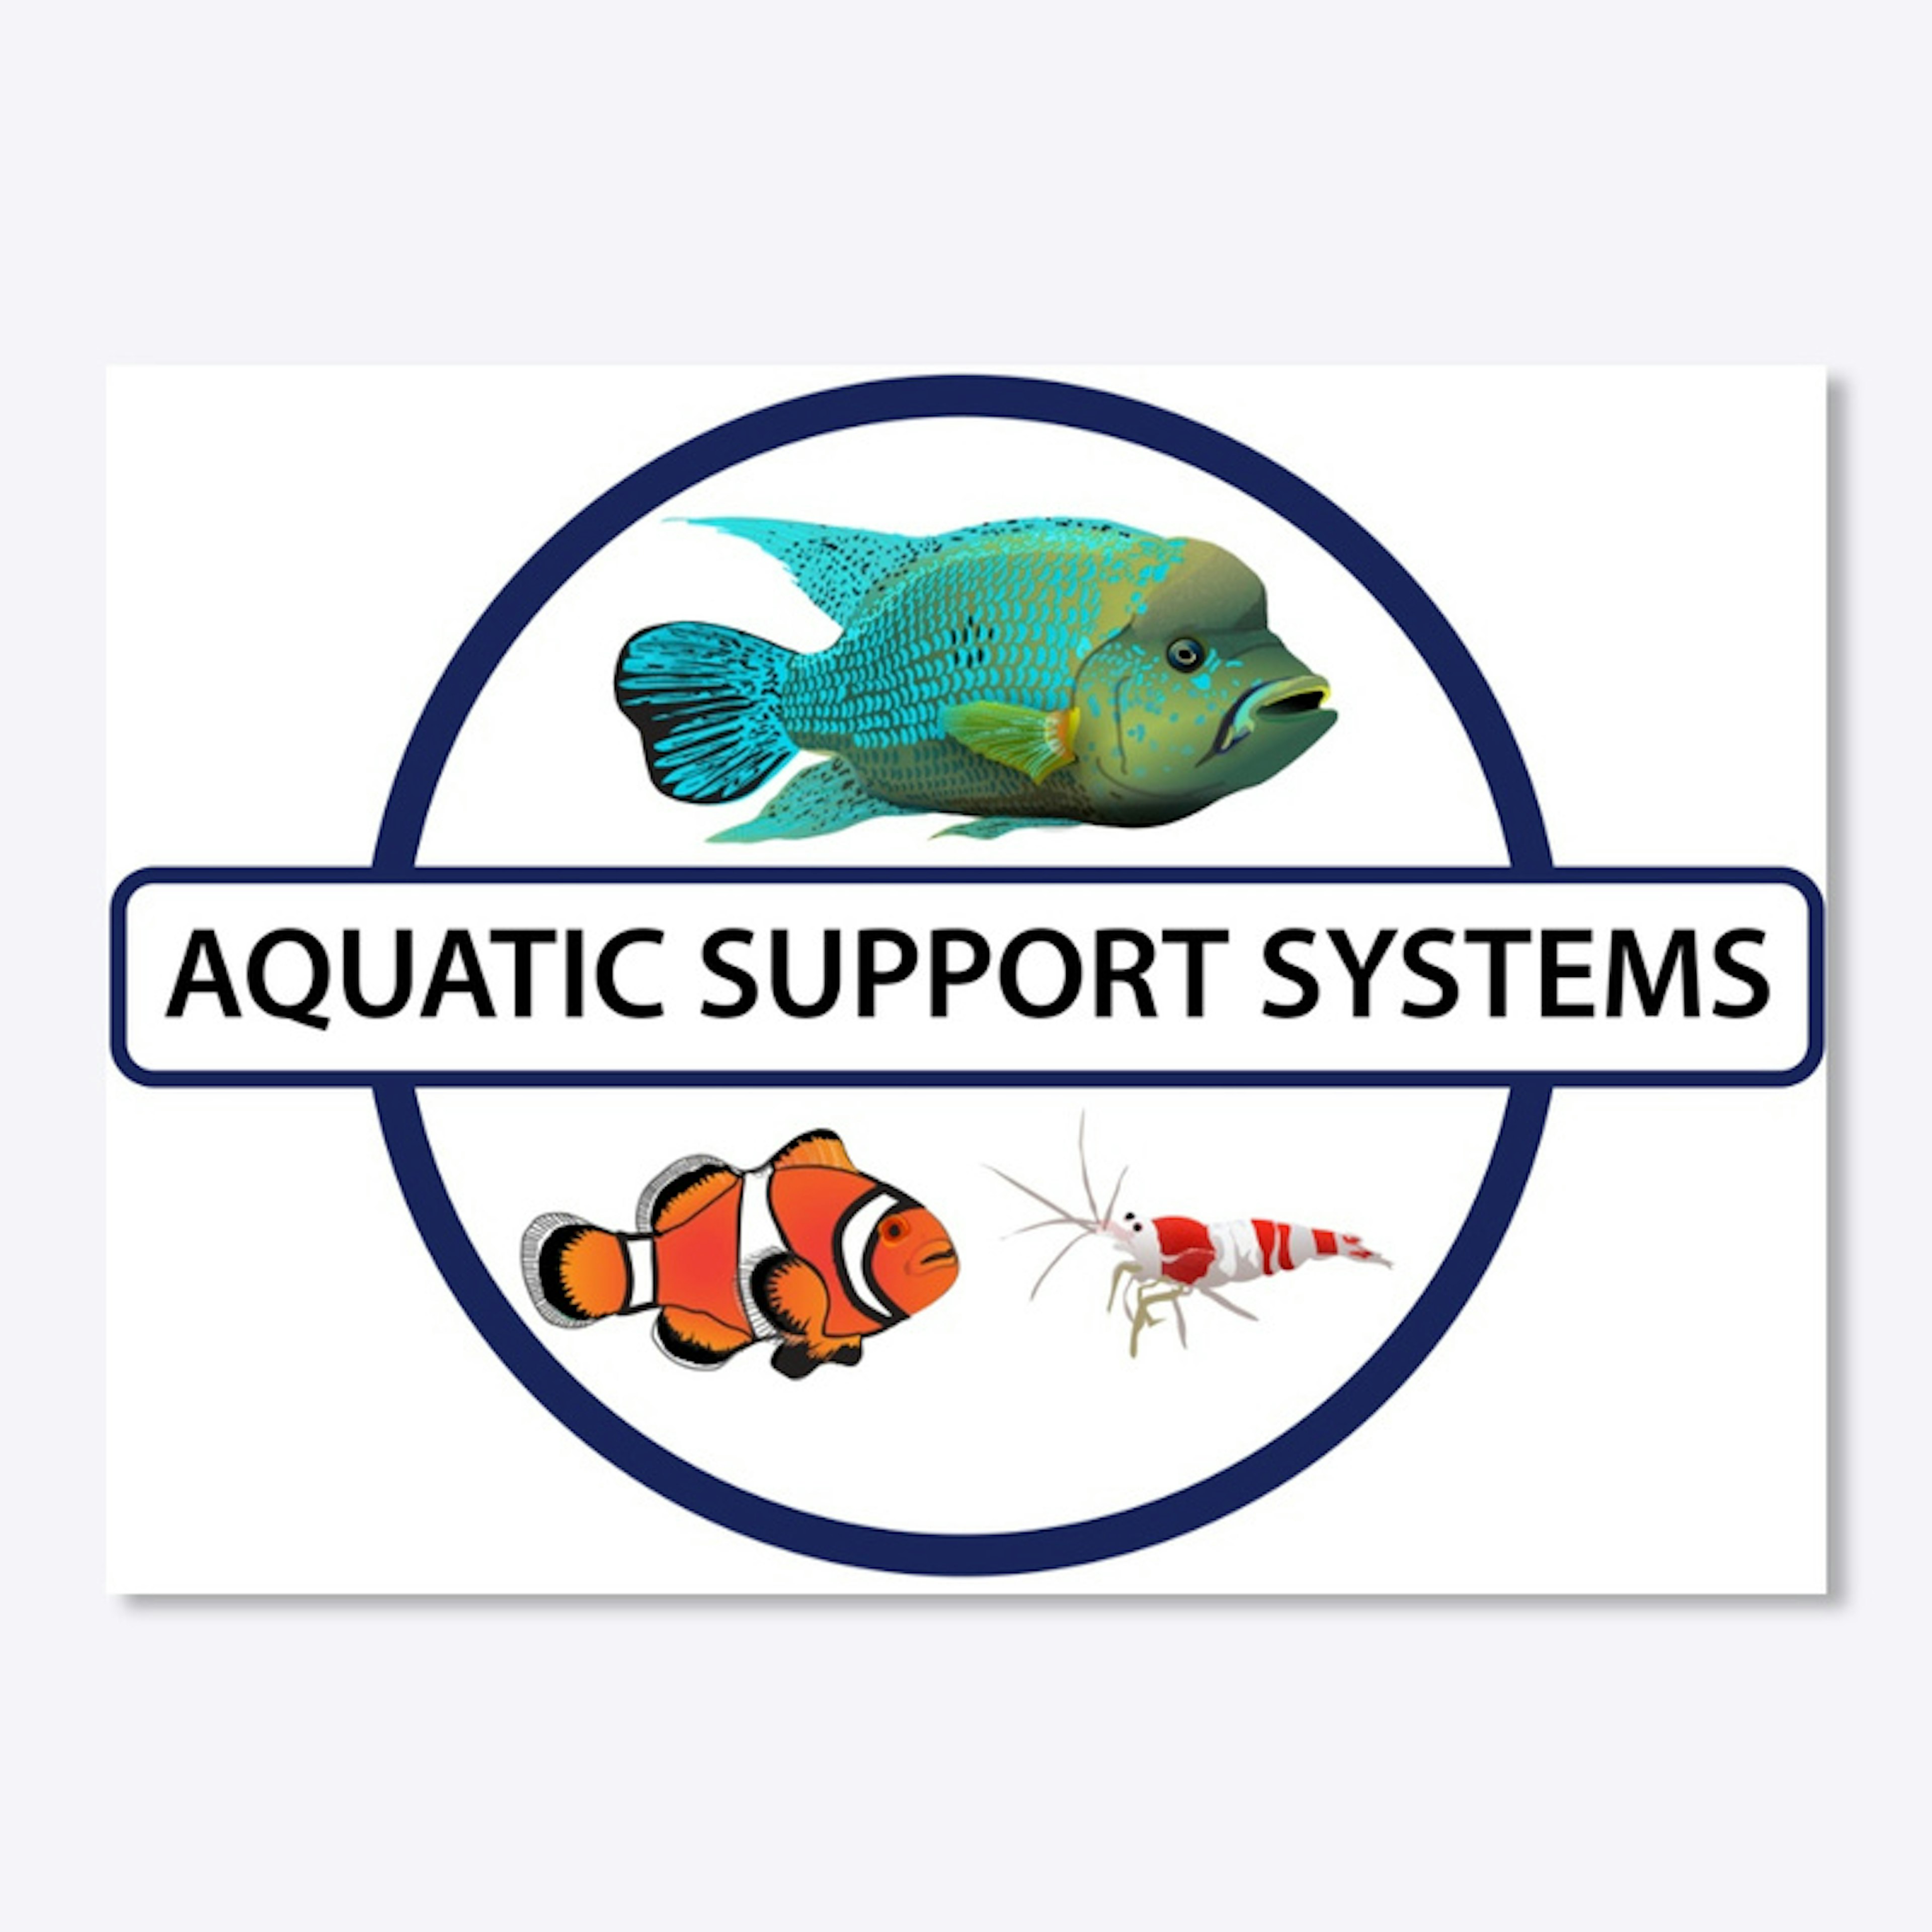 Aquatic Support Systems